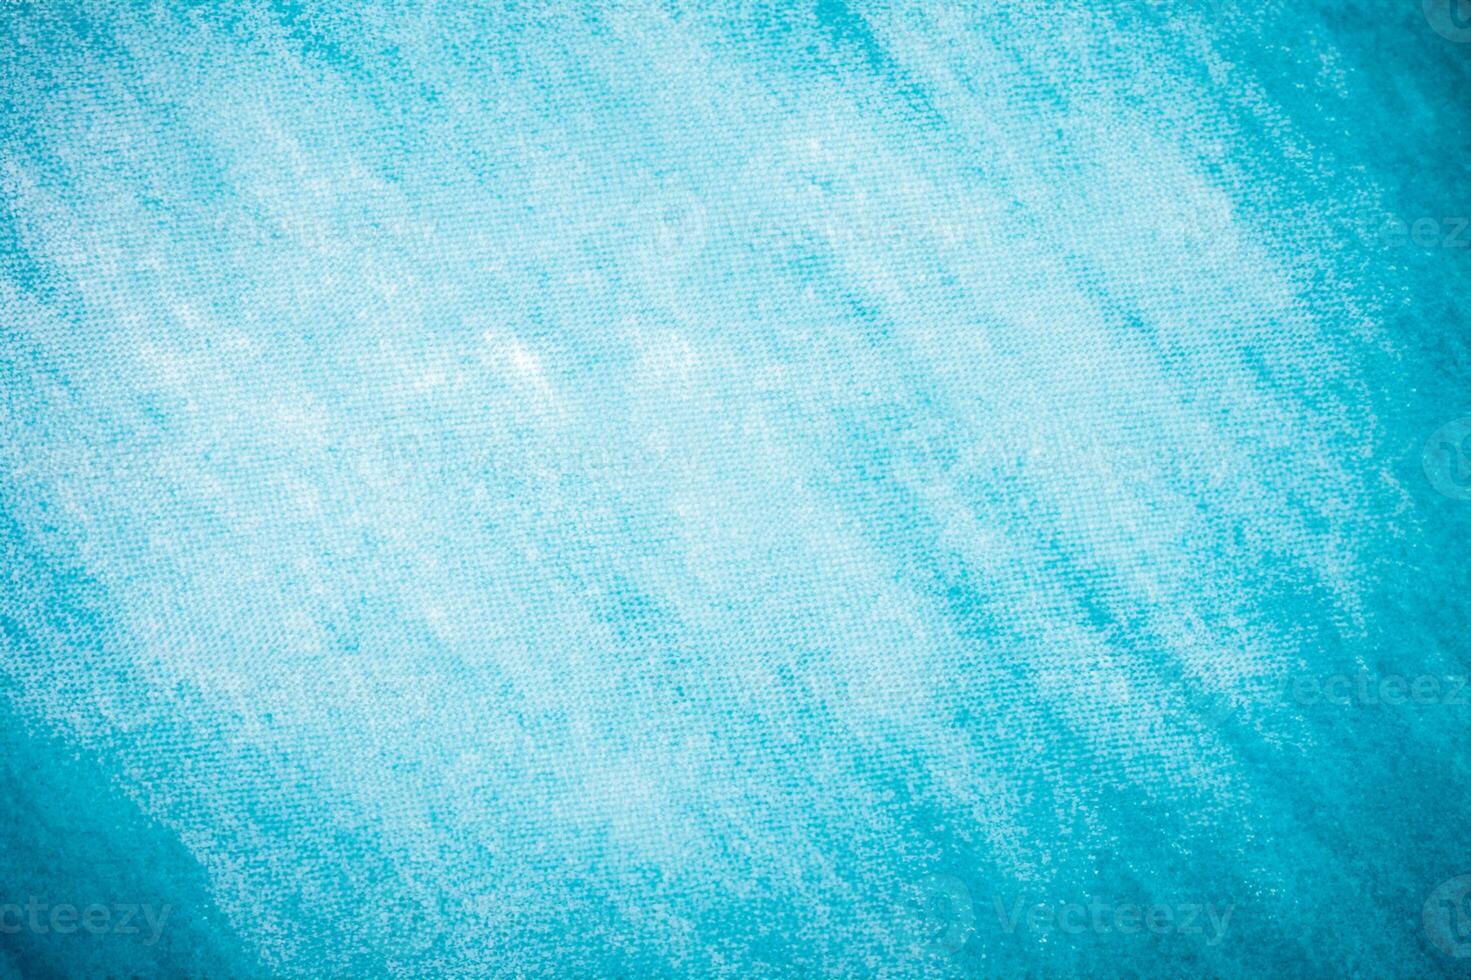 Capturing the Essence, Close Up of Blue Cotton's Surface and Texture. photo